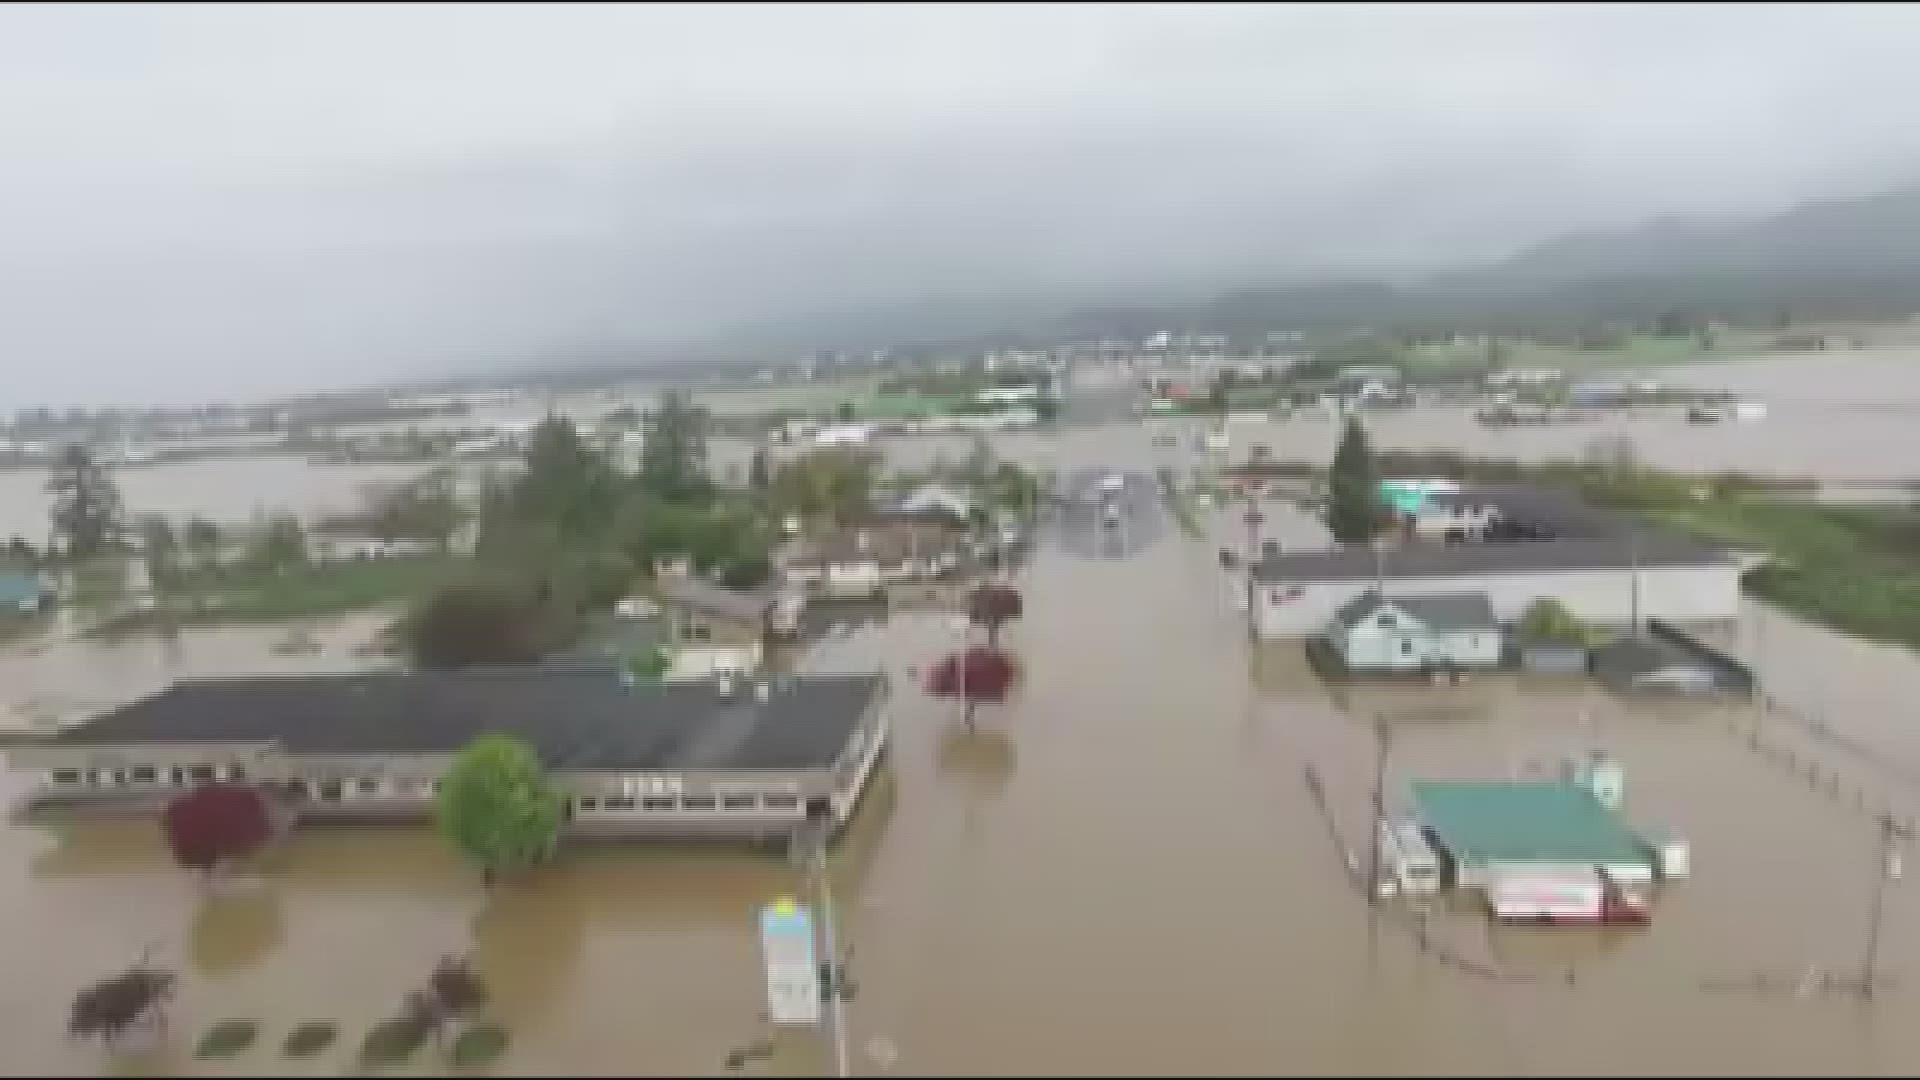 Julia and Doug Kettner sent us this drone footage of a flooded Tillamook on Sunday. Part of Highway 101 was temporarily closed due to deep water